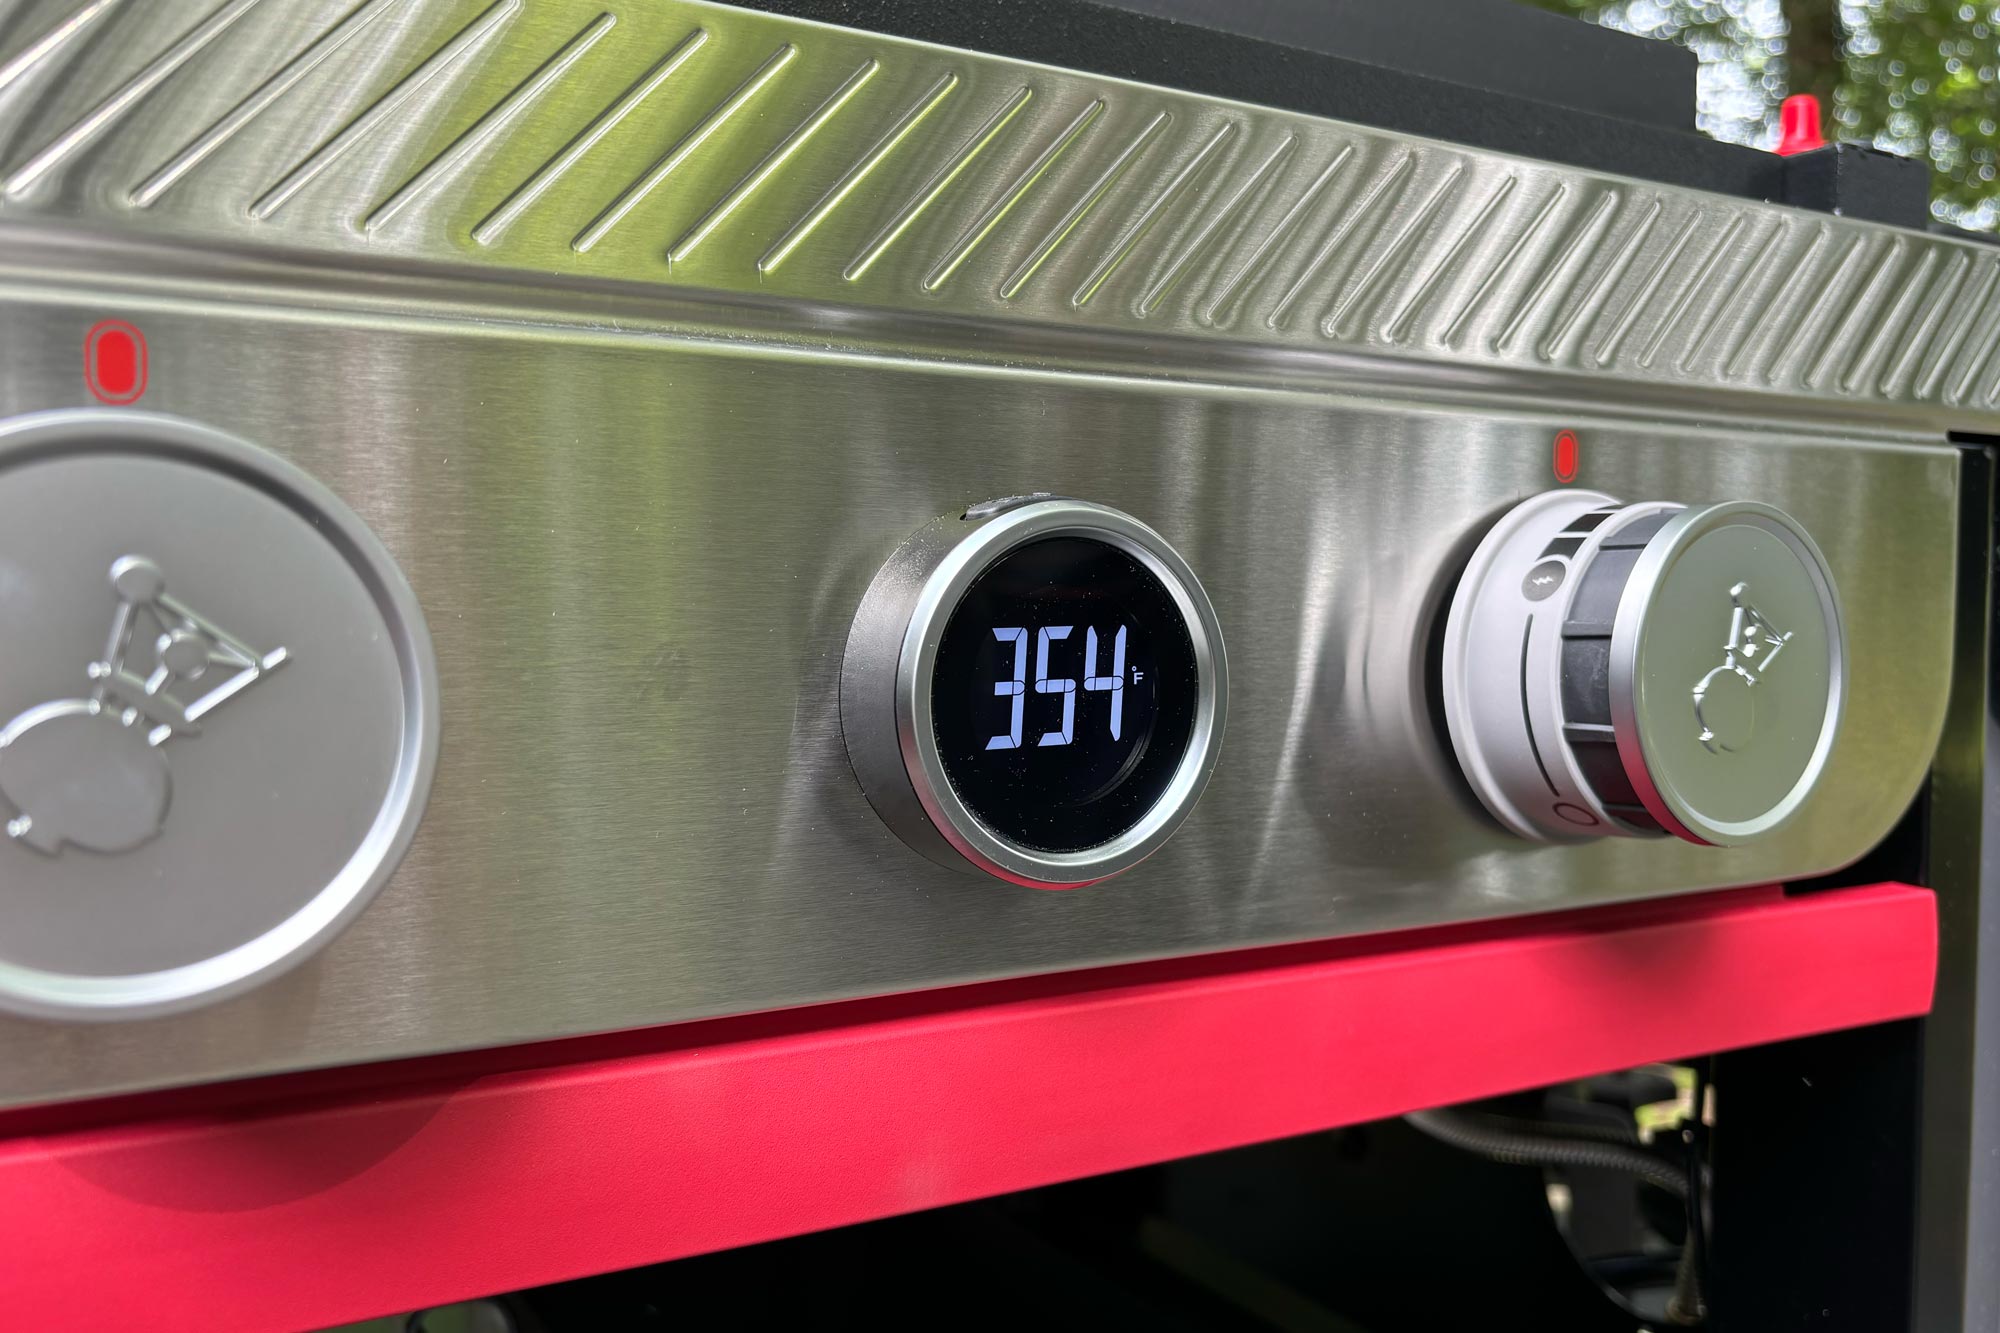 The digital temperature display is easy to read and comes in handy during every cook. 